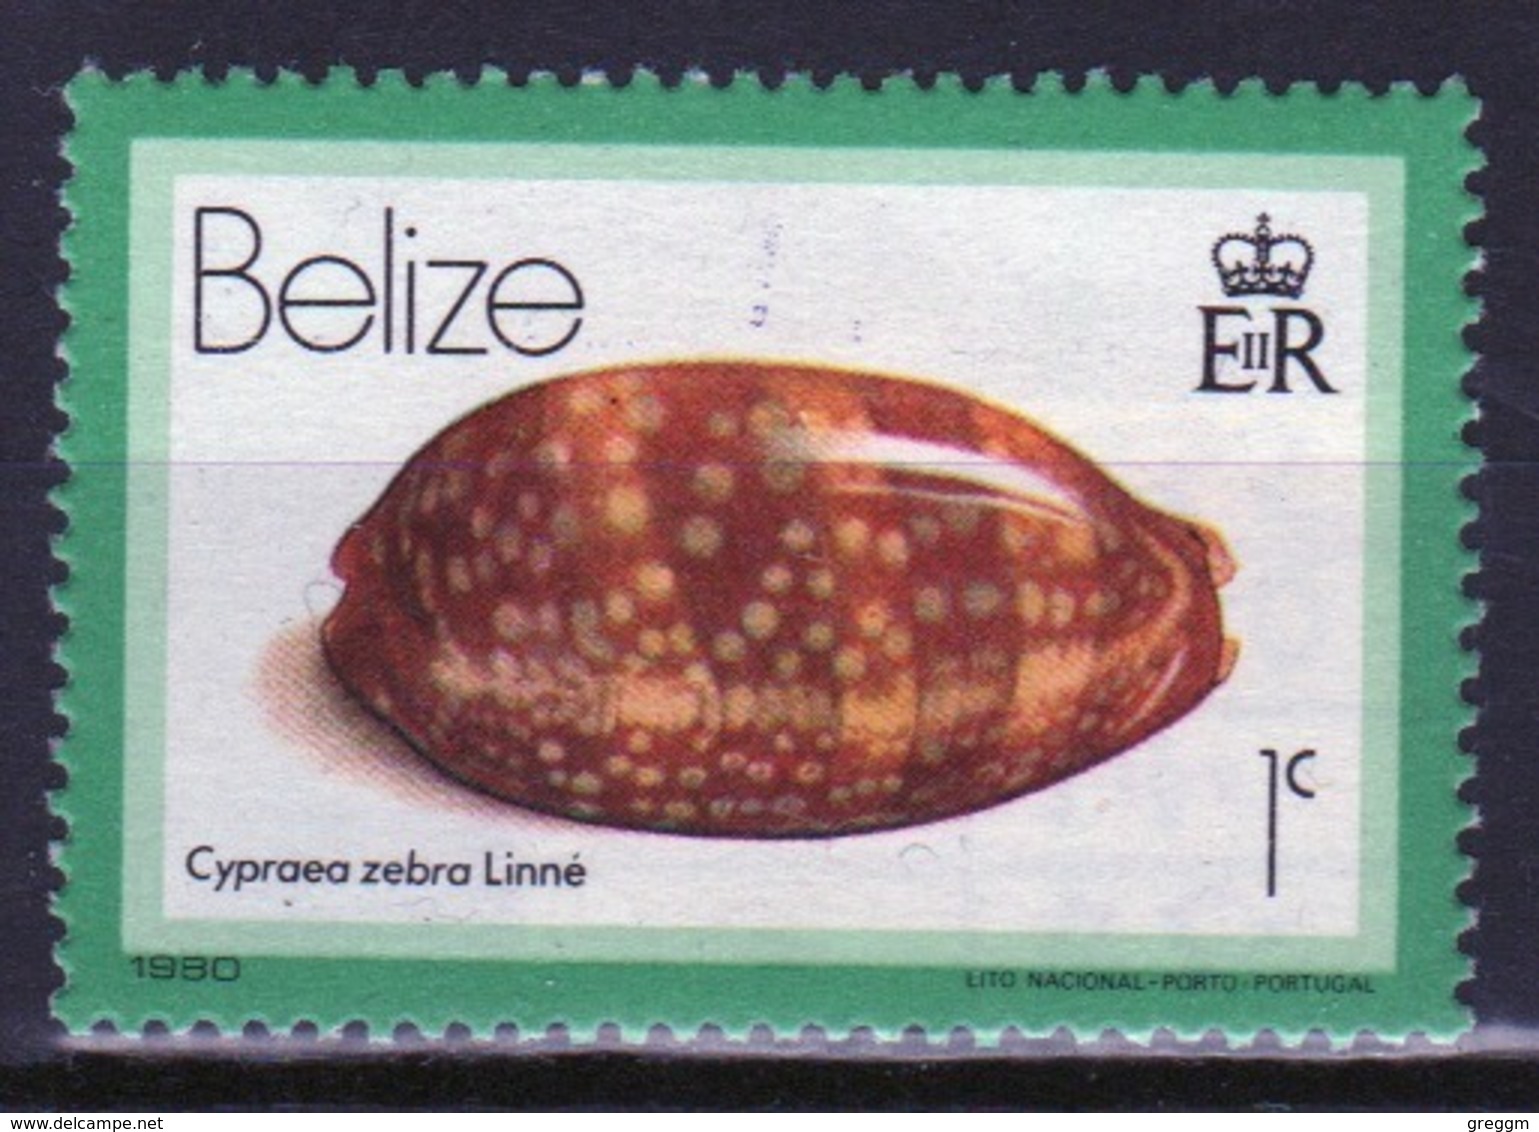 Belize 1980 Single 1 Cent Definitive Stamp From The Sea Shell Series. - Belize (1973-...)